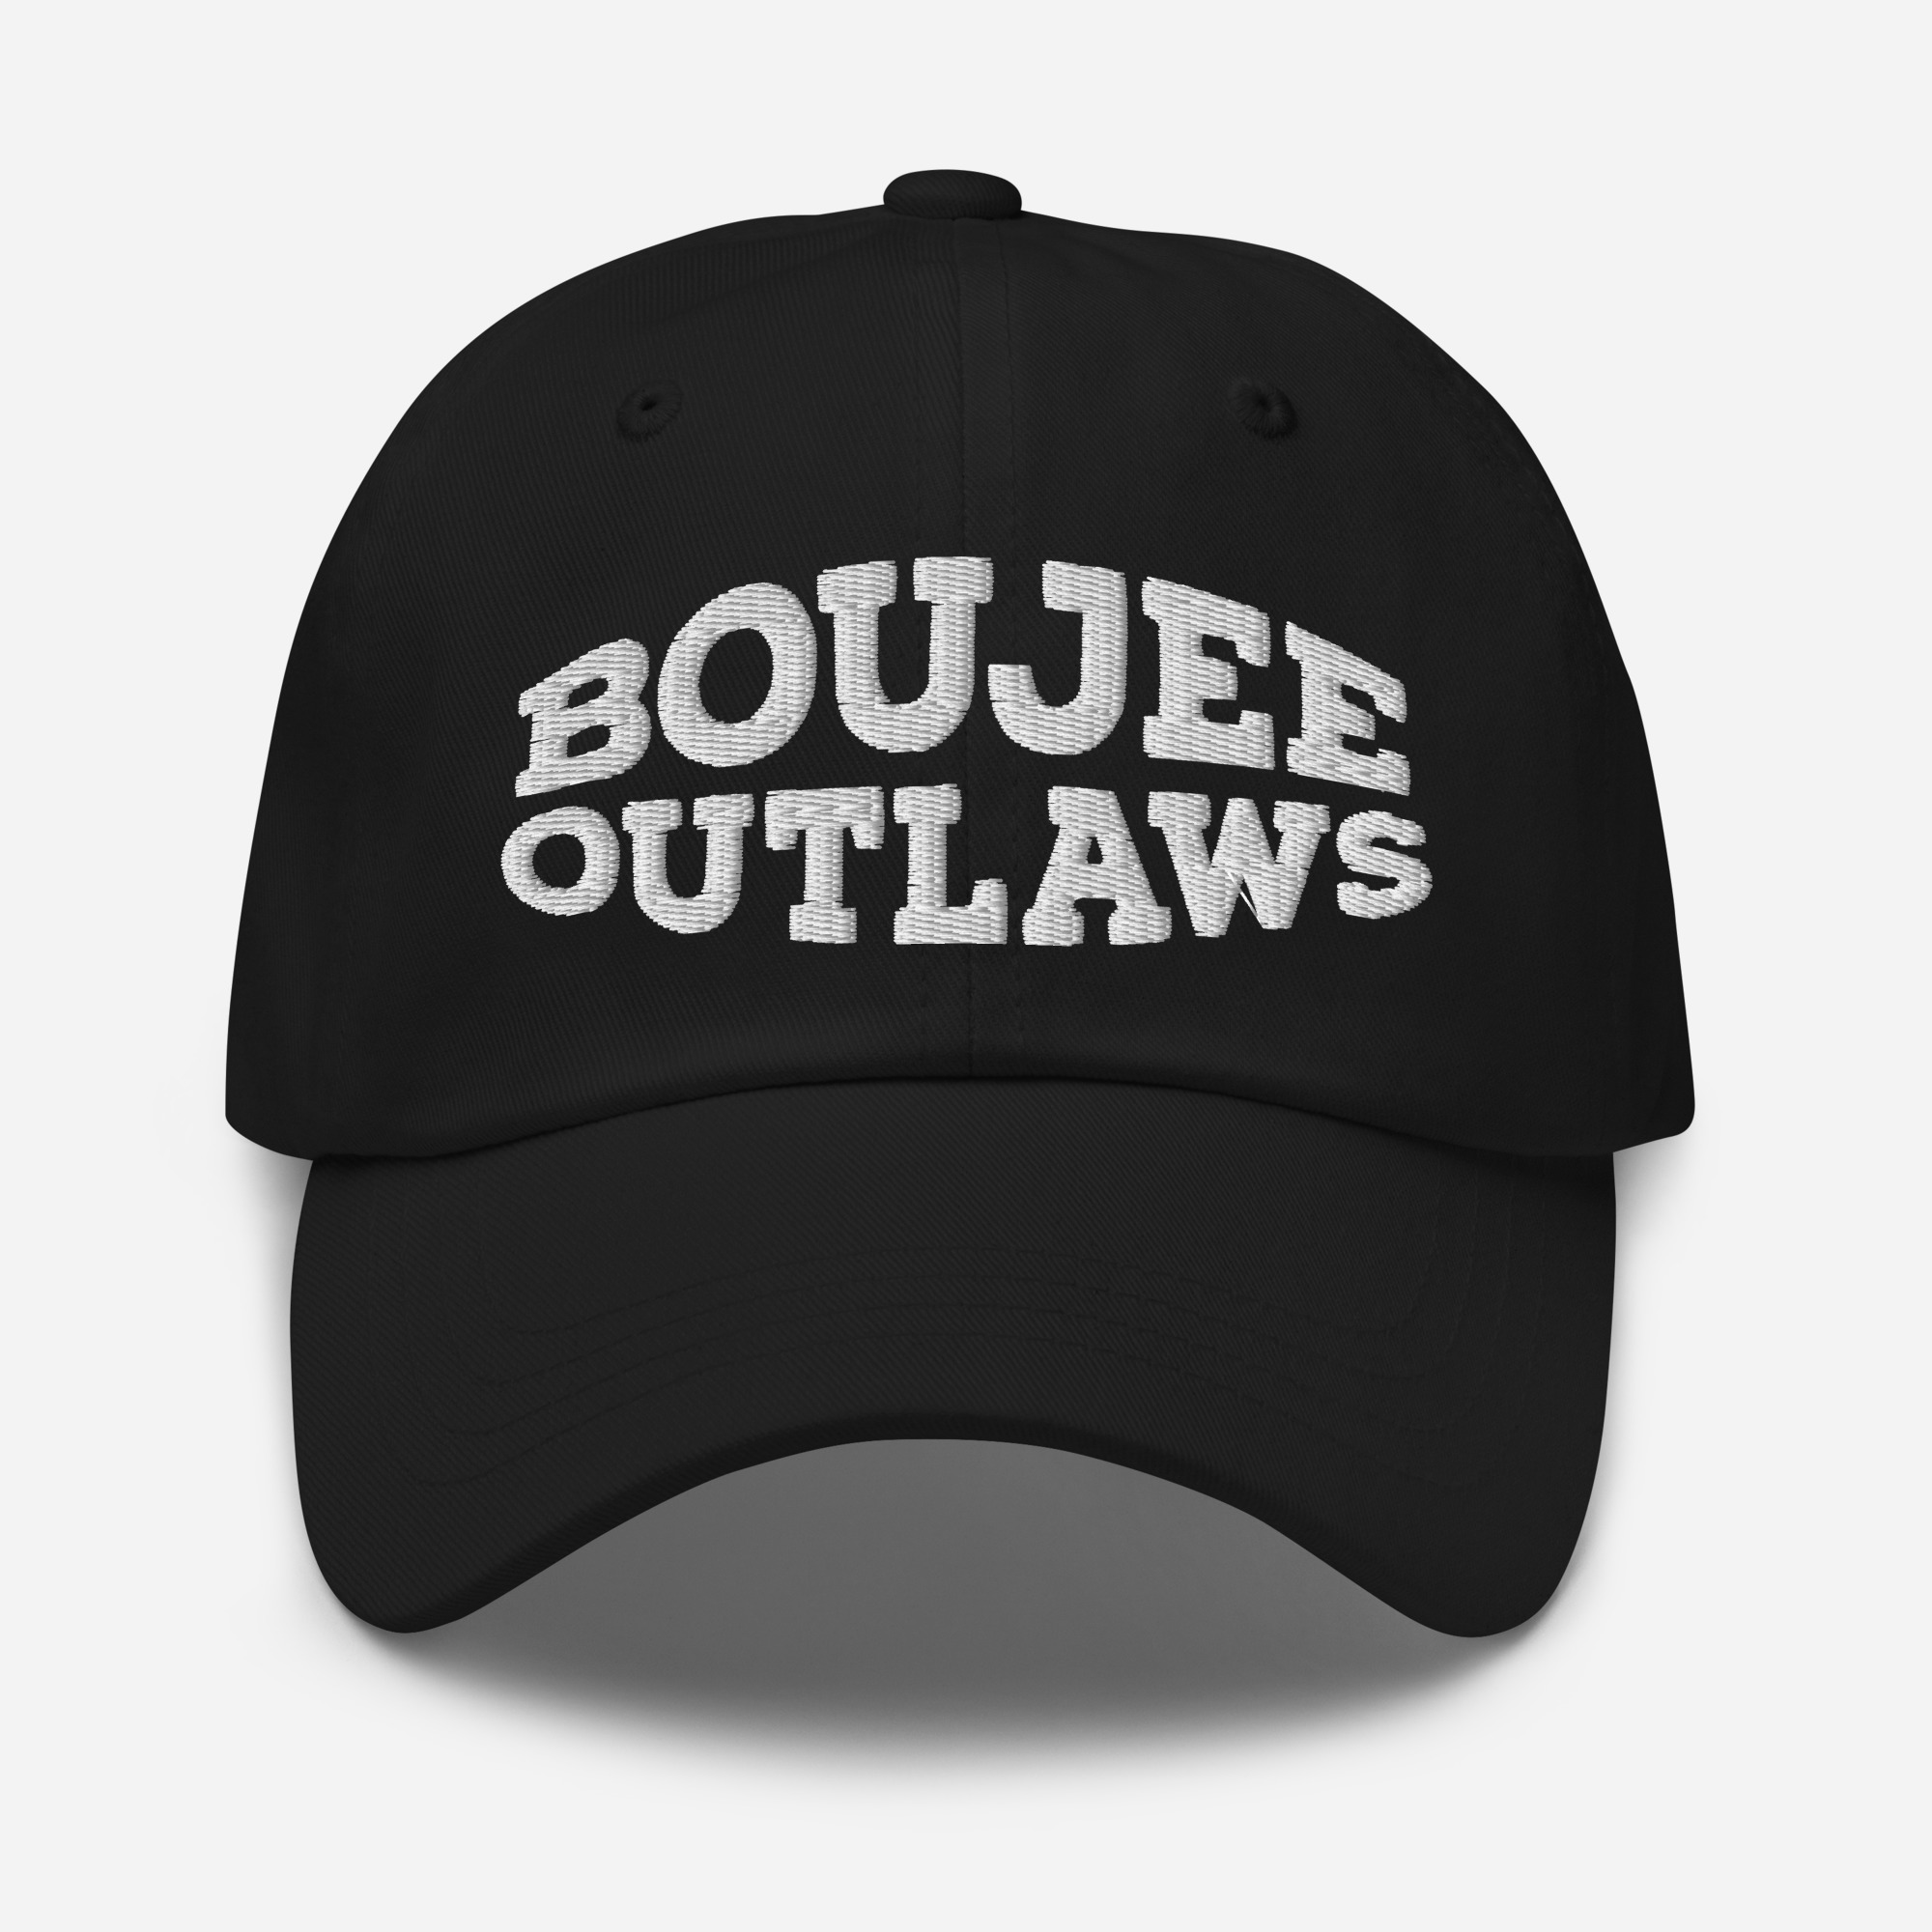 https://boujeeoutlaws.com/wp-content/uploads/woocommerce-placeholder.png